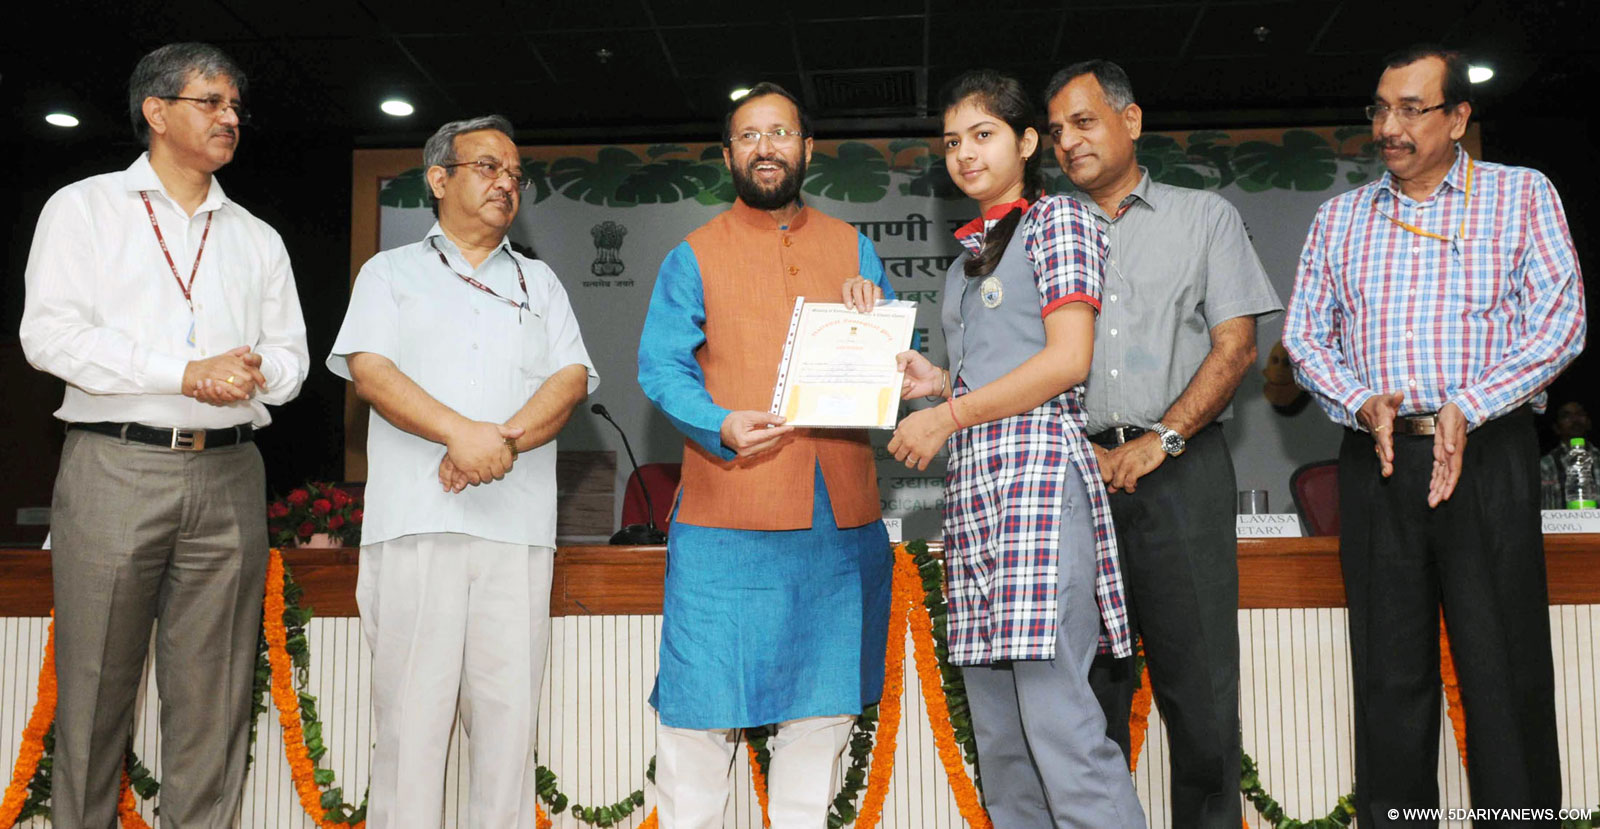 The Minister of State for Environment, Forest and Climate Change (Independent Charge), Shri Prakash Javadekar presented the certificates, at the Prize distribution function of Wildlife Week, in New Delhi on October 14, 2015. The Secretary, Ministry of Environment, Forest and Climate Change, Shri Ashok Lavasa and other dignitaries are also seen.